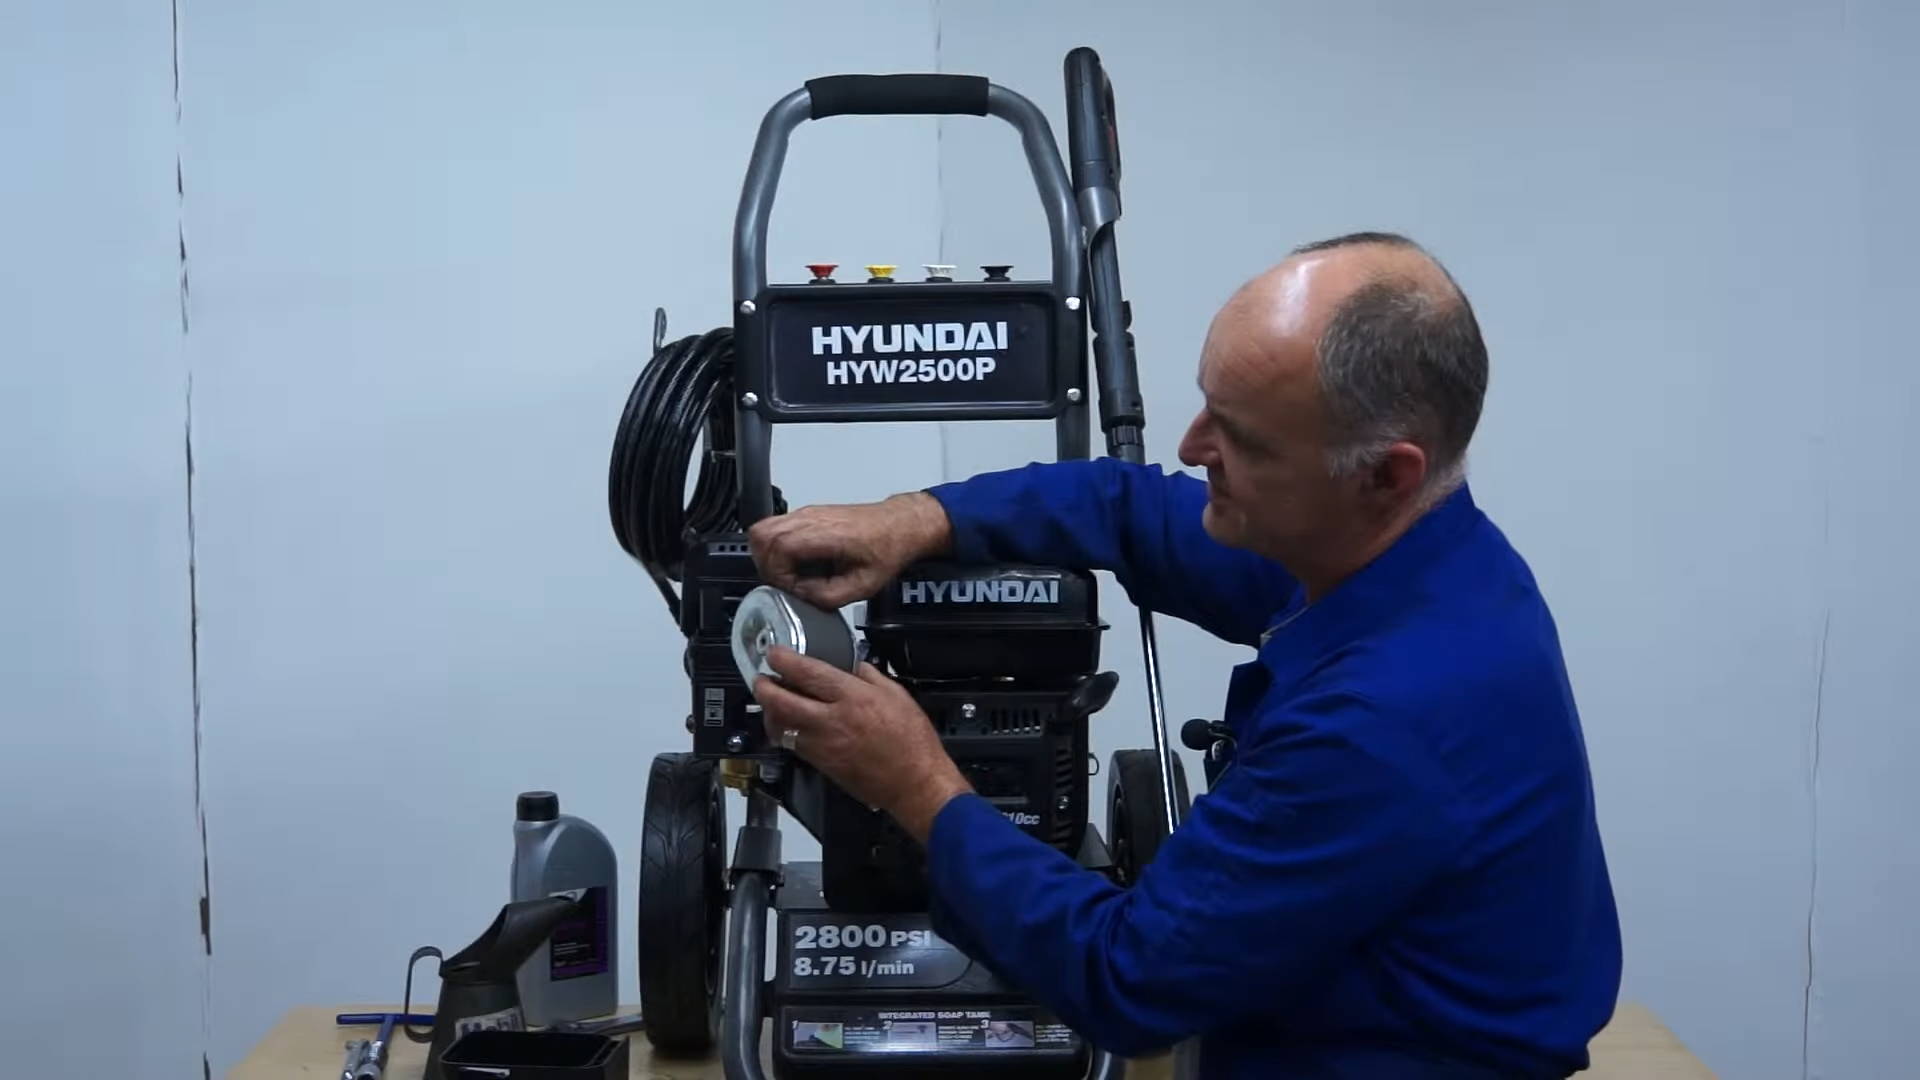 Guide to Cleaning Hyundai Pressure Washer Filter